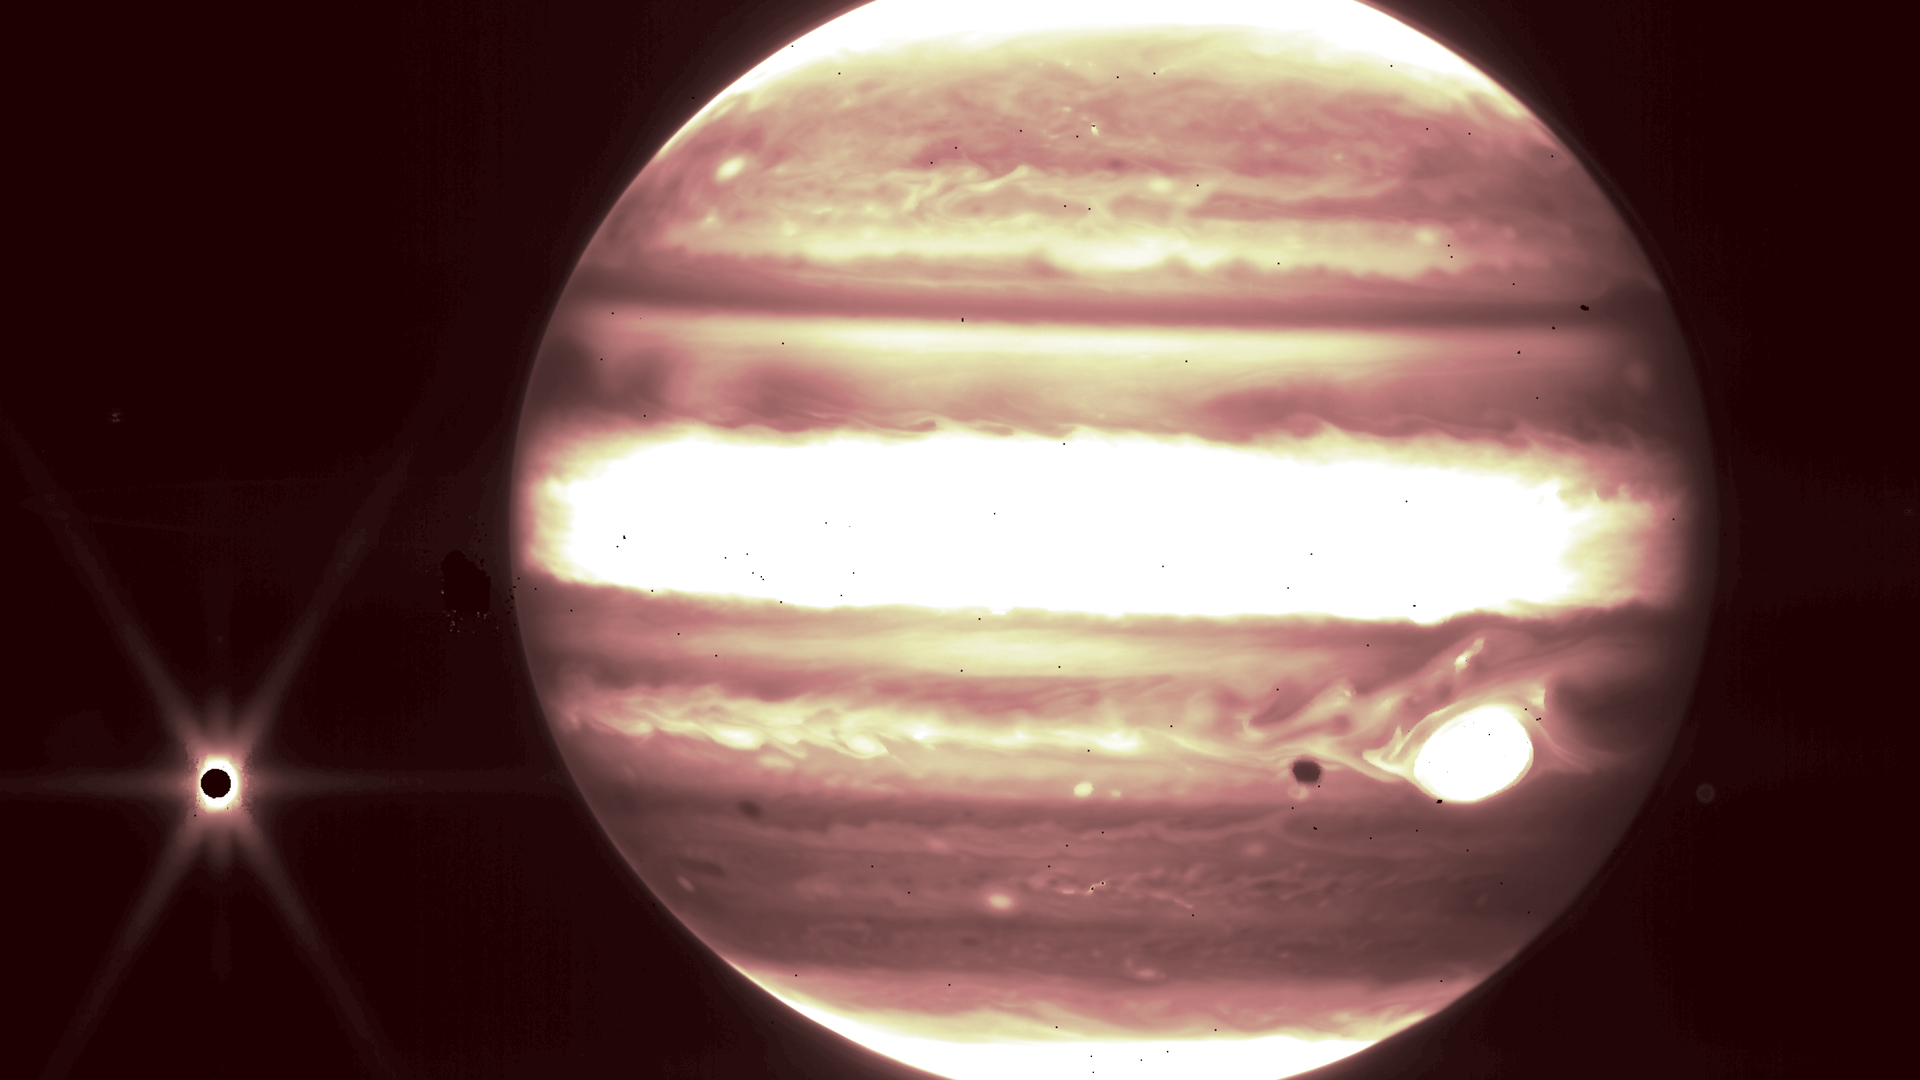 Jupiter shining in red and yellow seen in infrared by the James Webb Space Telescope.